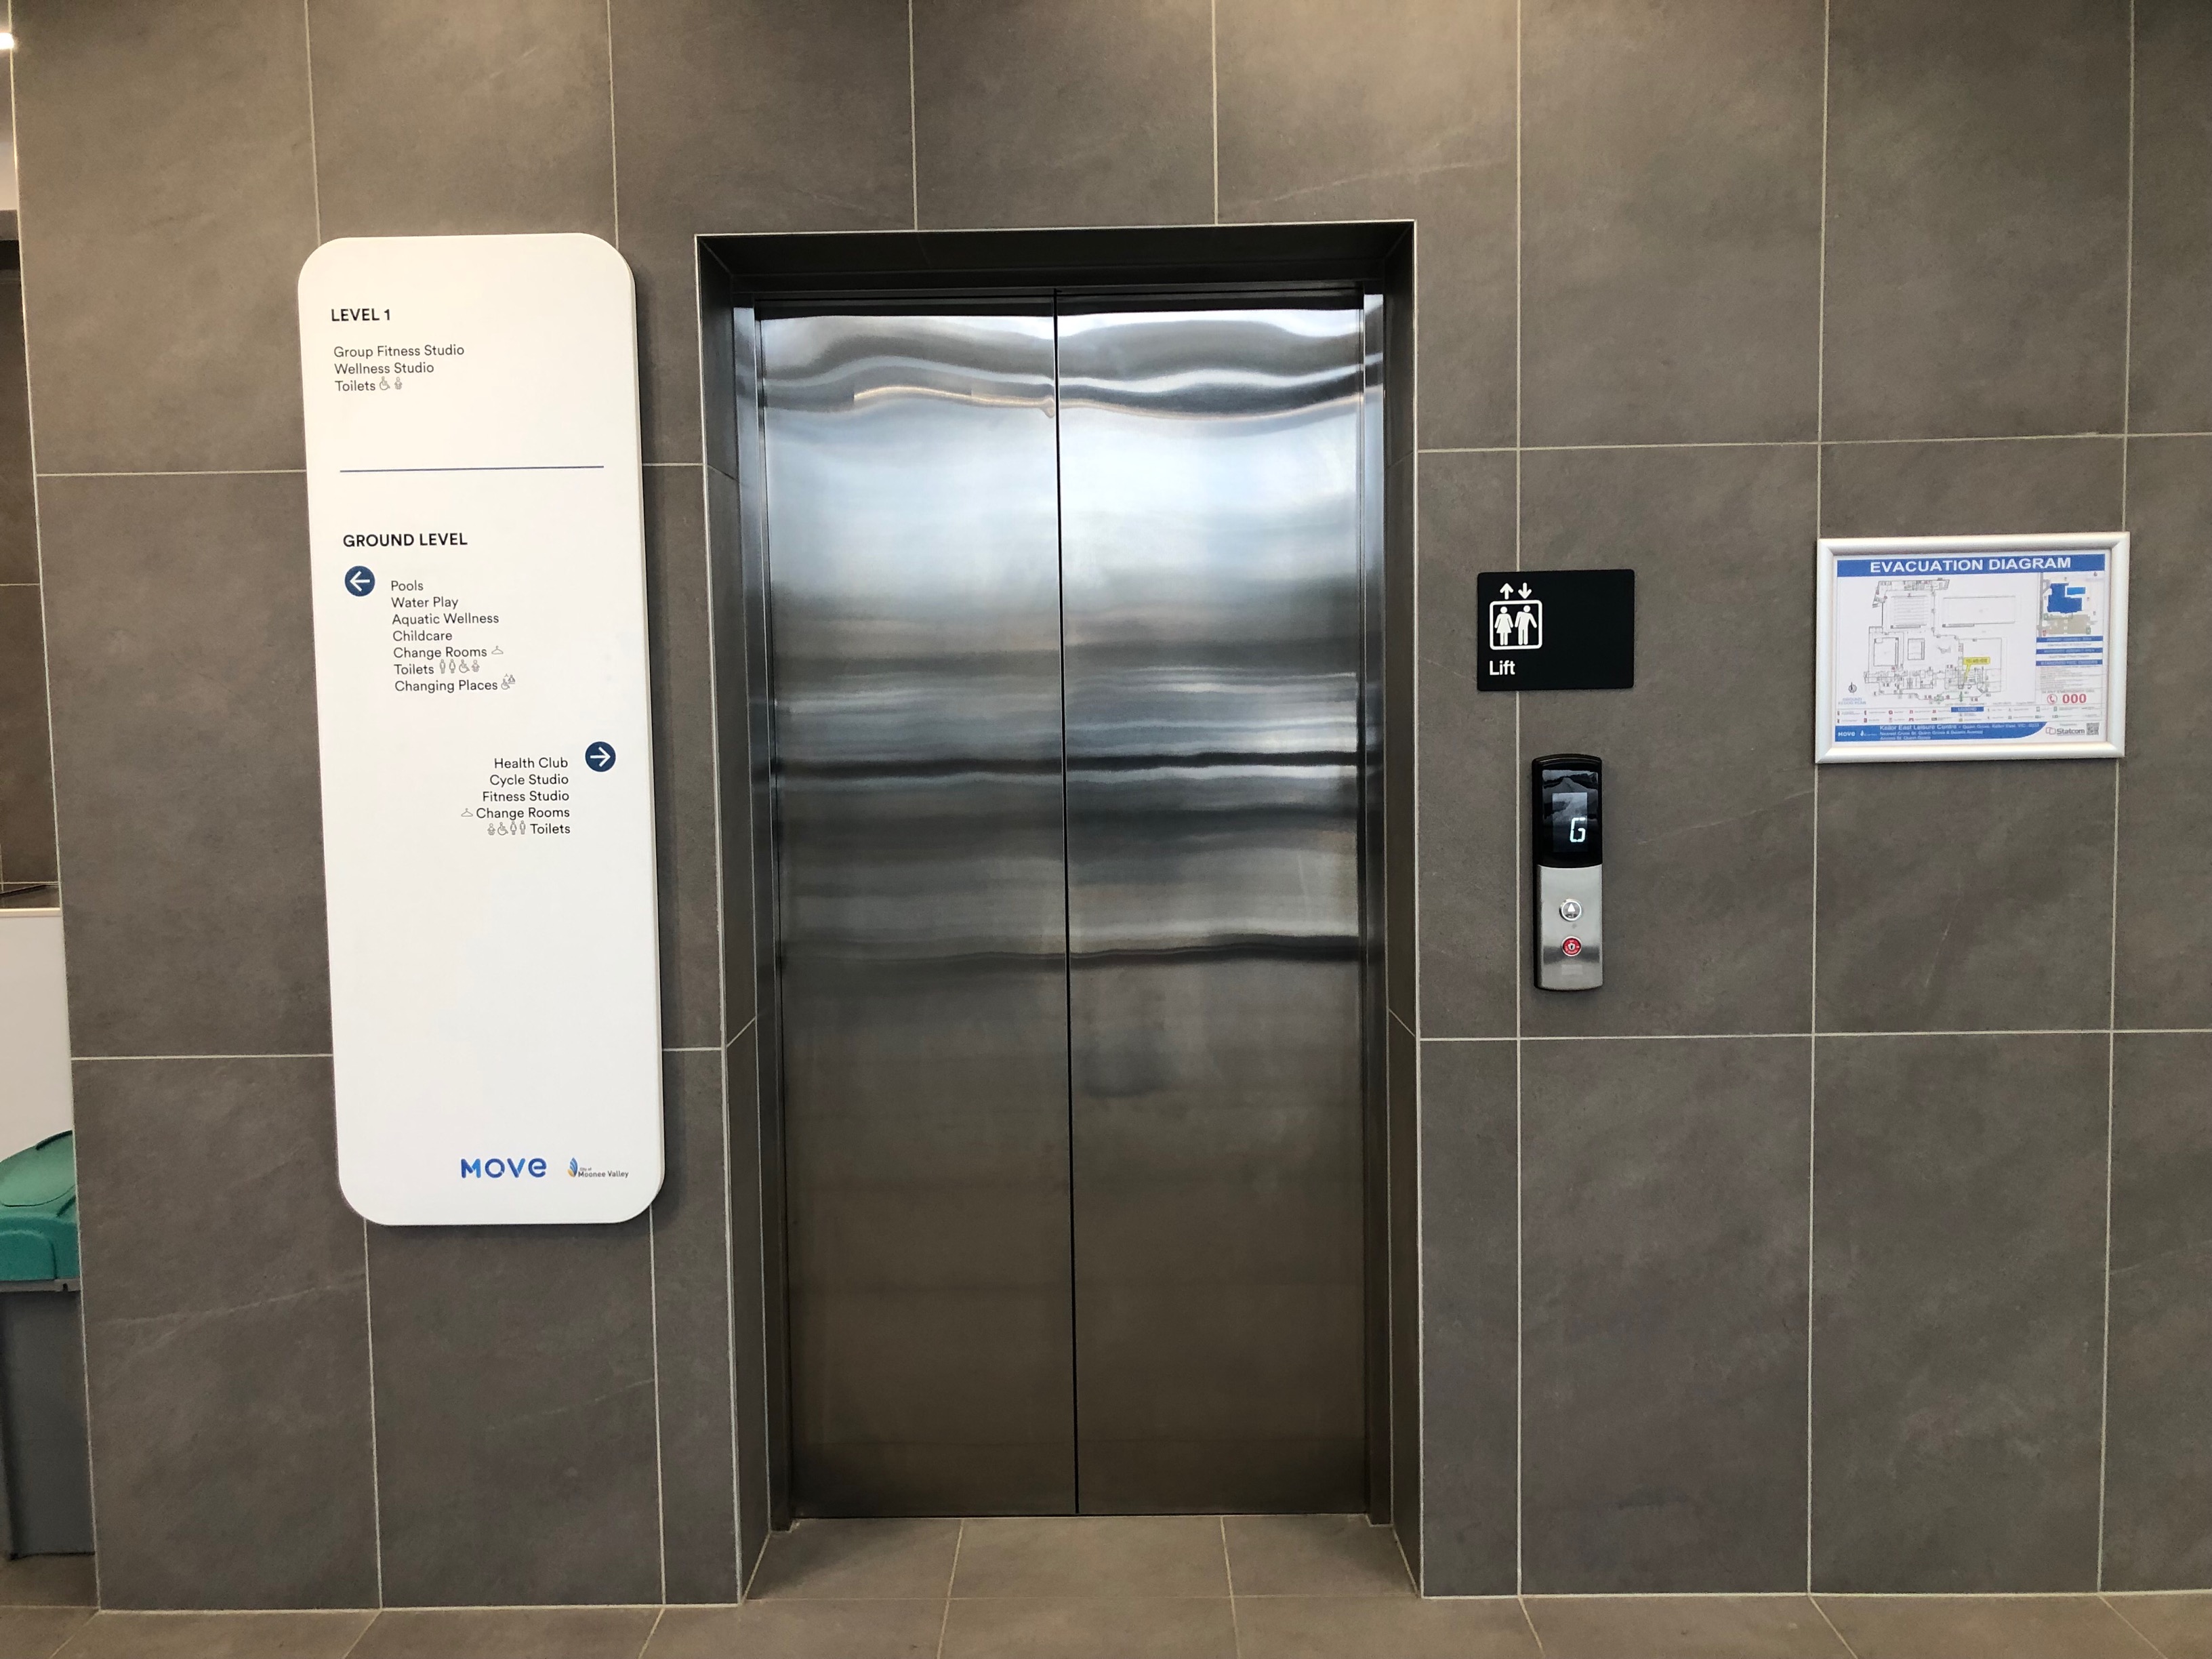 Image of the wheelchair accessible elevator, located near the entrance foyer